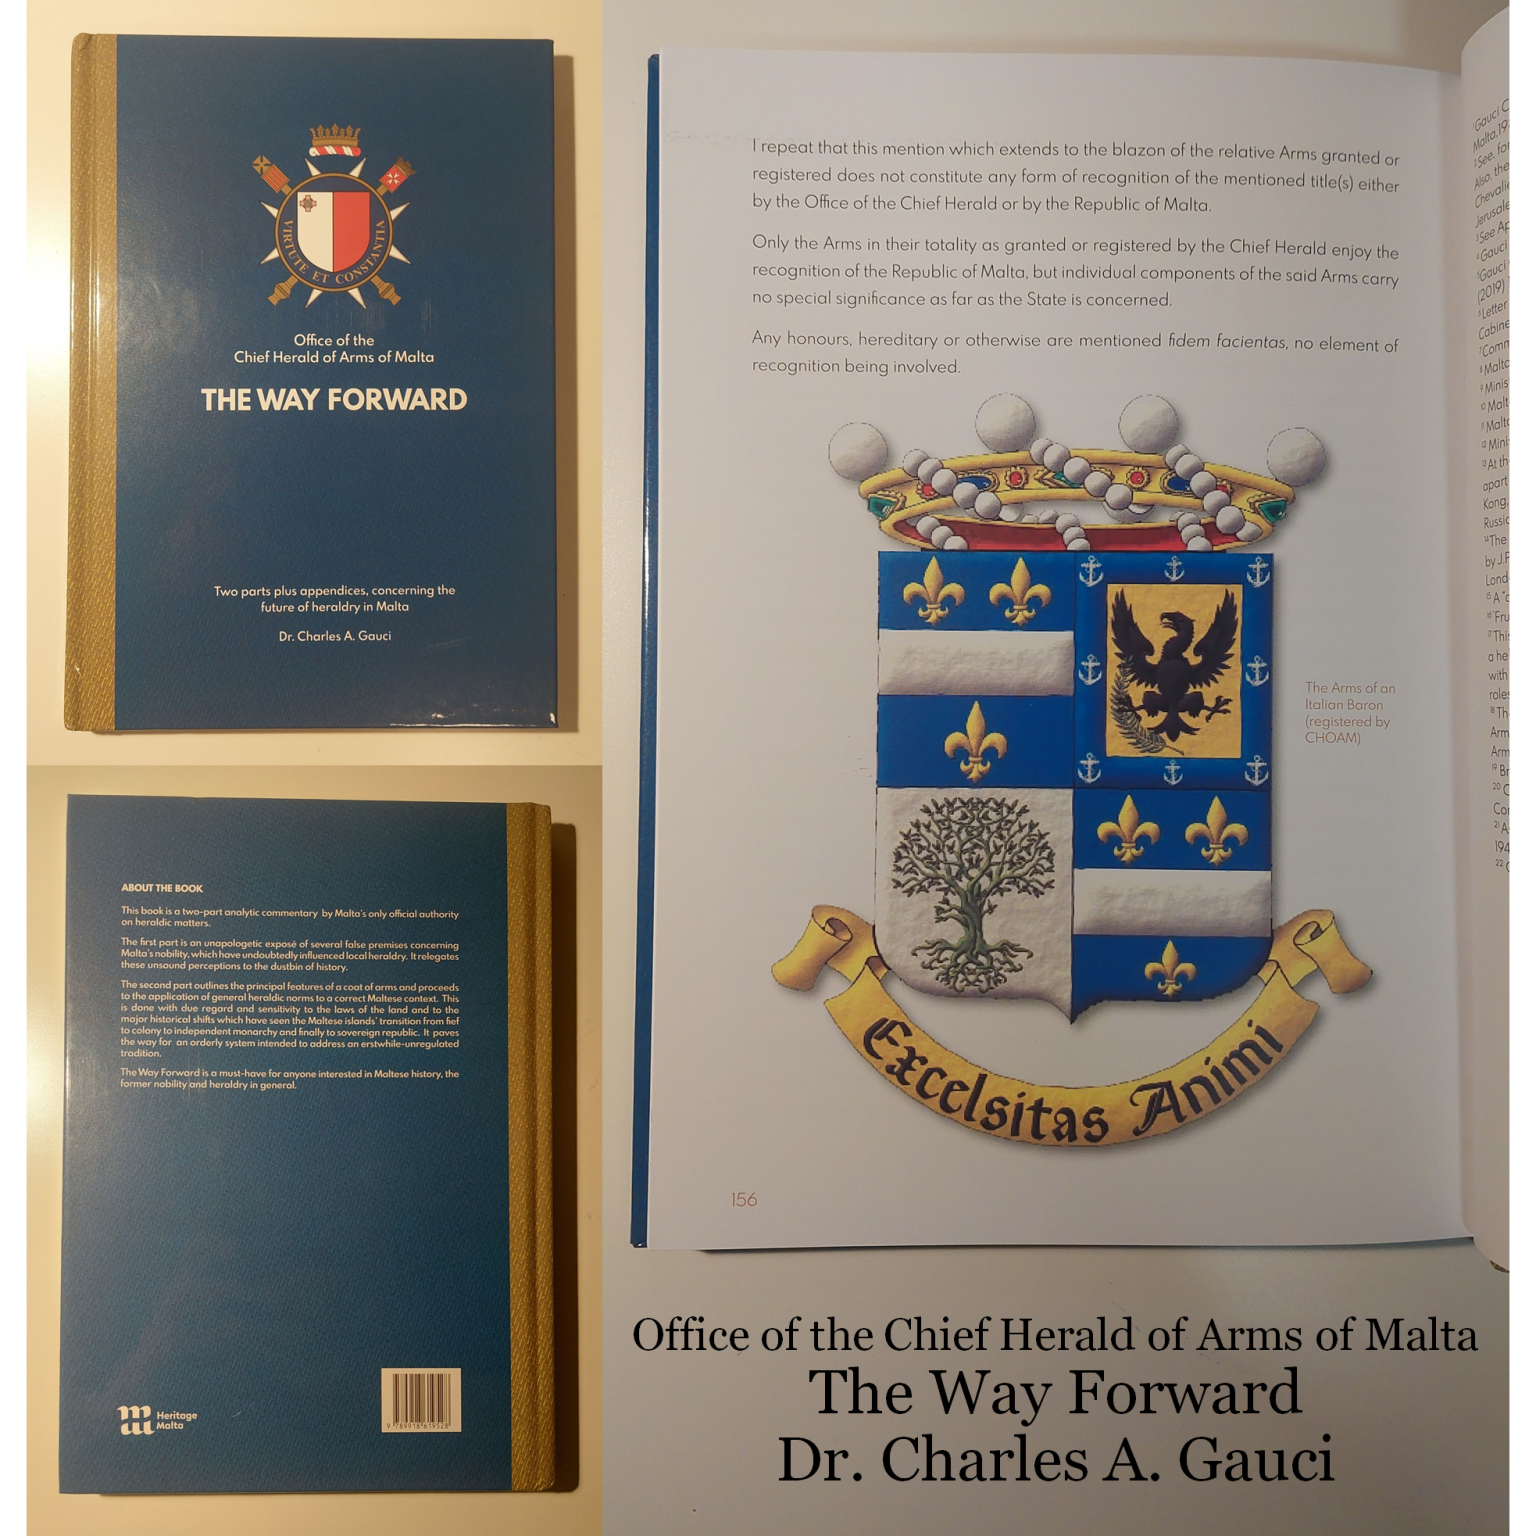 In the book «The Way Forward» by Dr. Charles A. Gauci, the Chief Herald of Arms of Malta, the arms of Baron Michele Tollis Olivari, which were emblazoned by me, are featured on page 156. It has been an immense honor for me